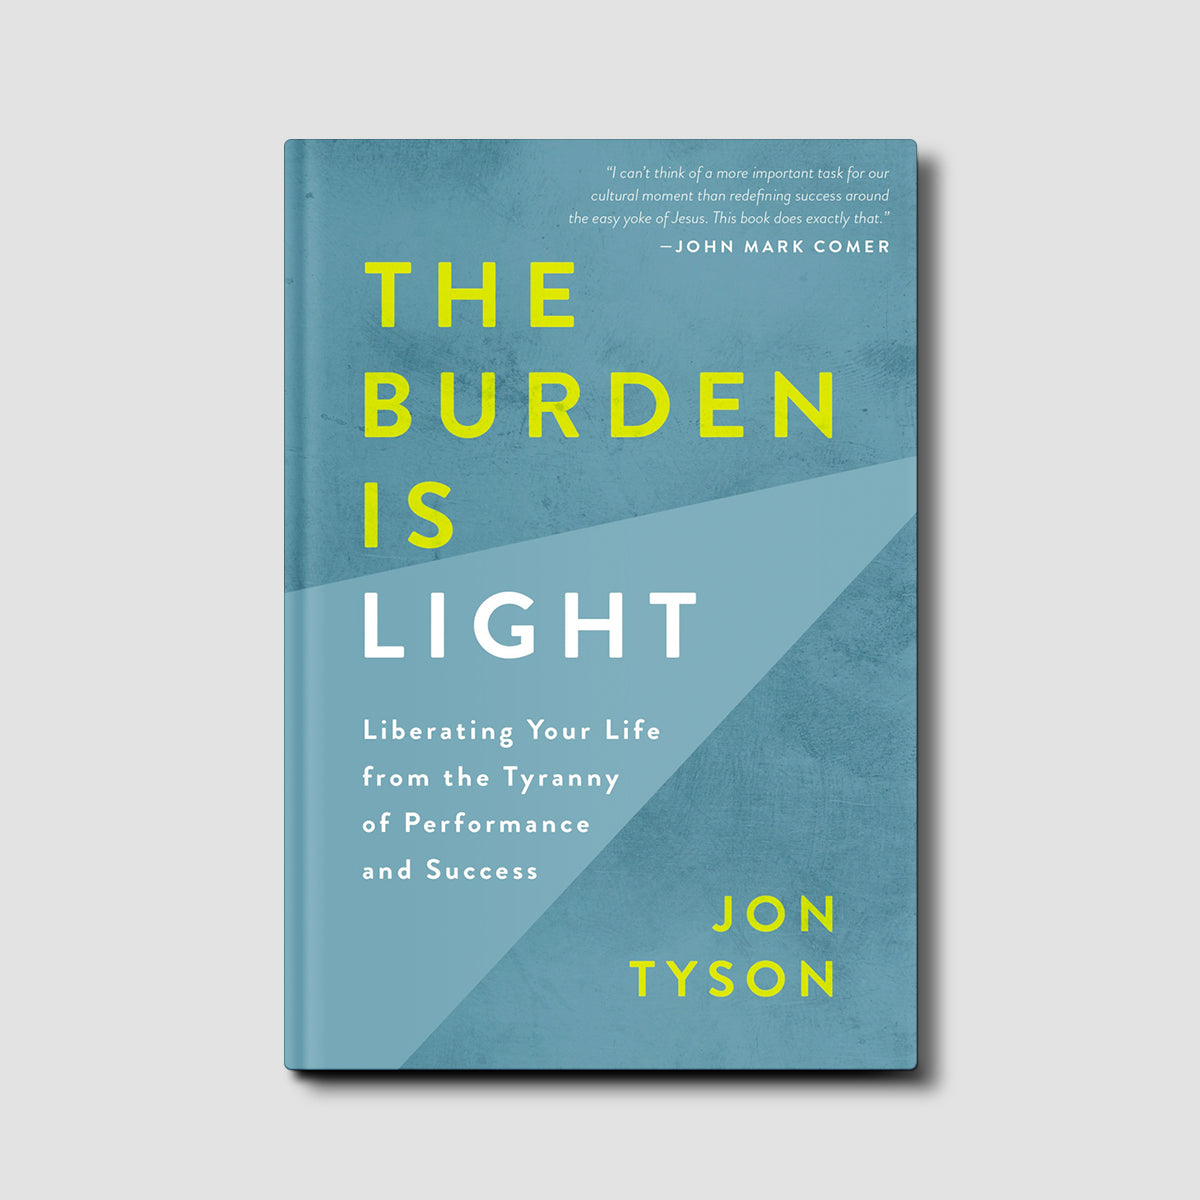 The Burden Is Light: Liberating Your Life from the Tyranny of Performance and Success